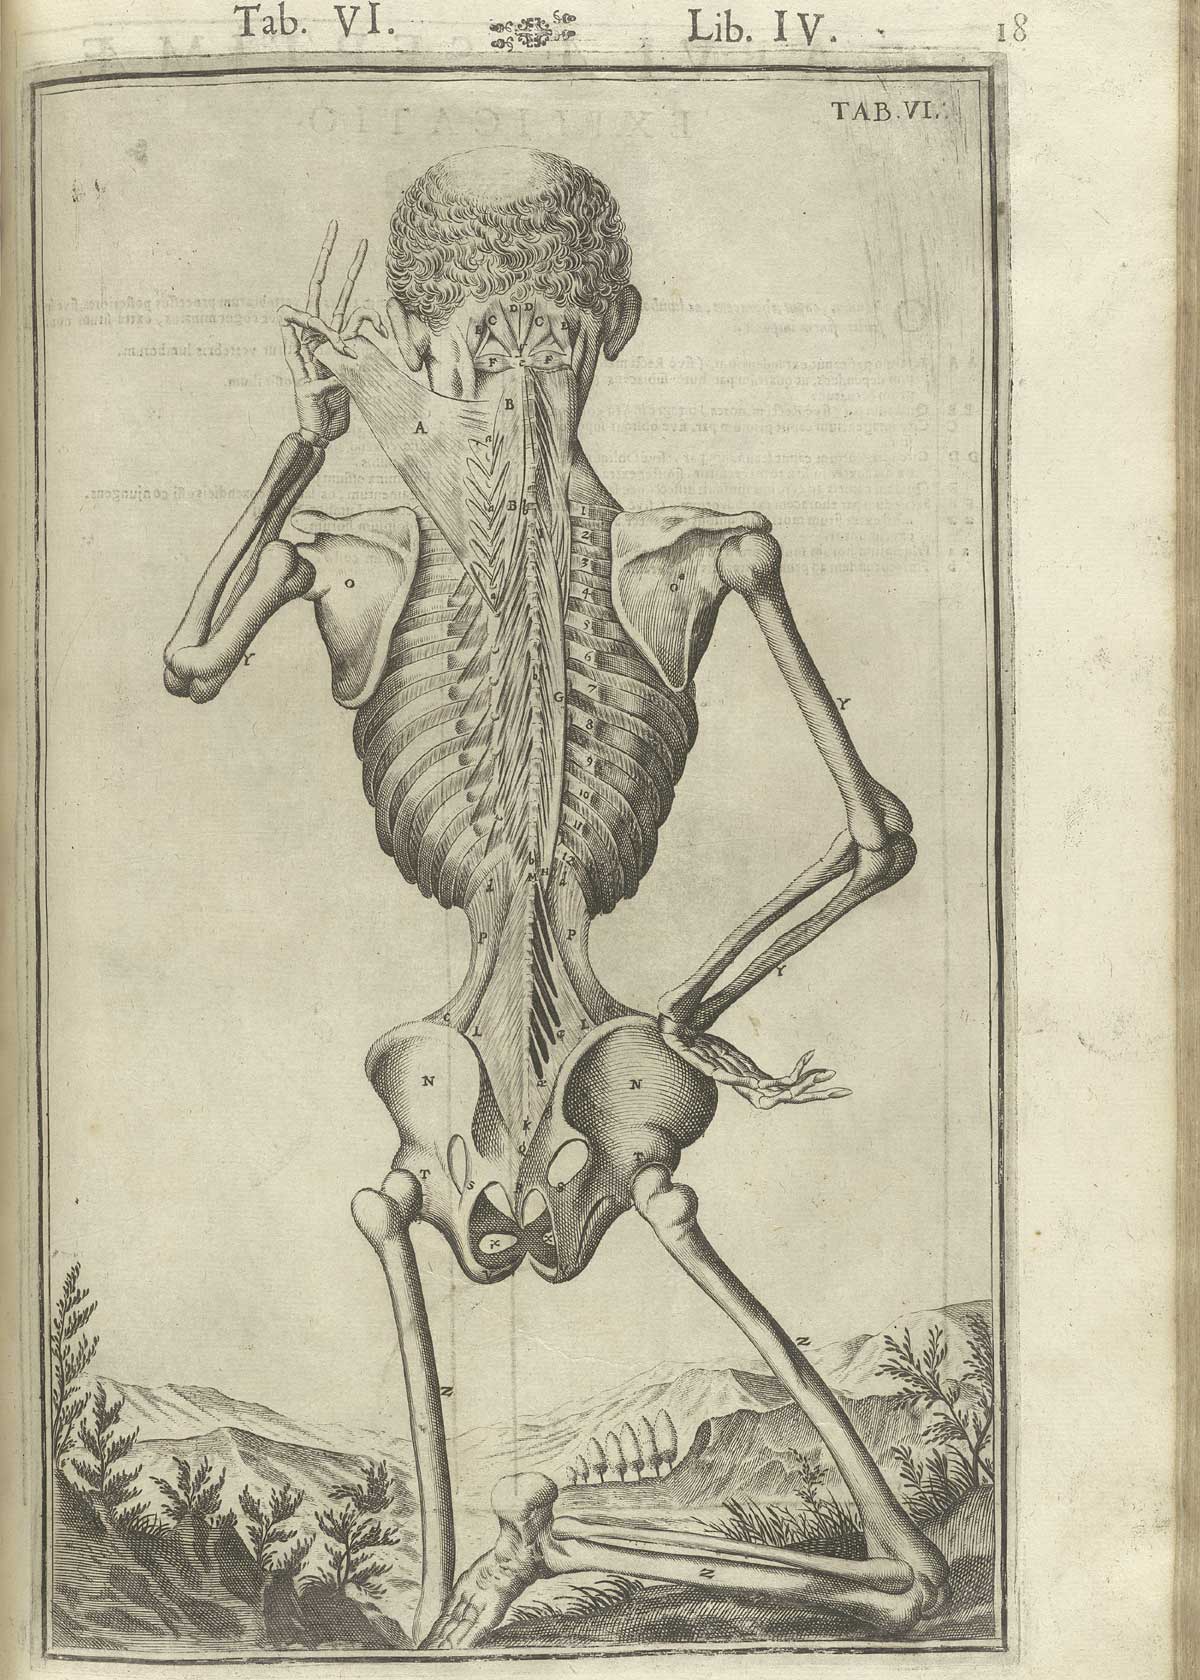 Engraving showing a standing skeleton with his back to the viewer, his left hand holding a muscle flap attached to the spine, in a pastoral setting with a valley beyond the figure in the background, from Adriaan van de Spiegel and Giulio Cassieri’s De humani corporis fabrica libri decem, Venice, 1627, NLM call no. WZ 250 S755dh 1627.